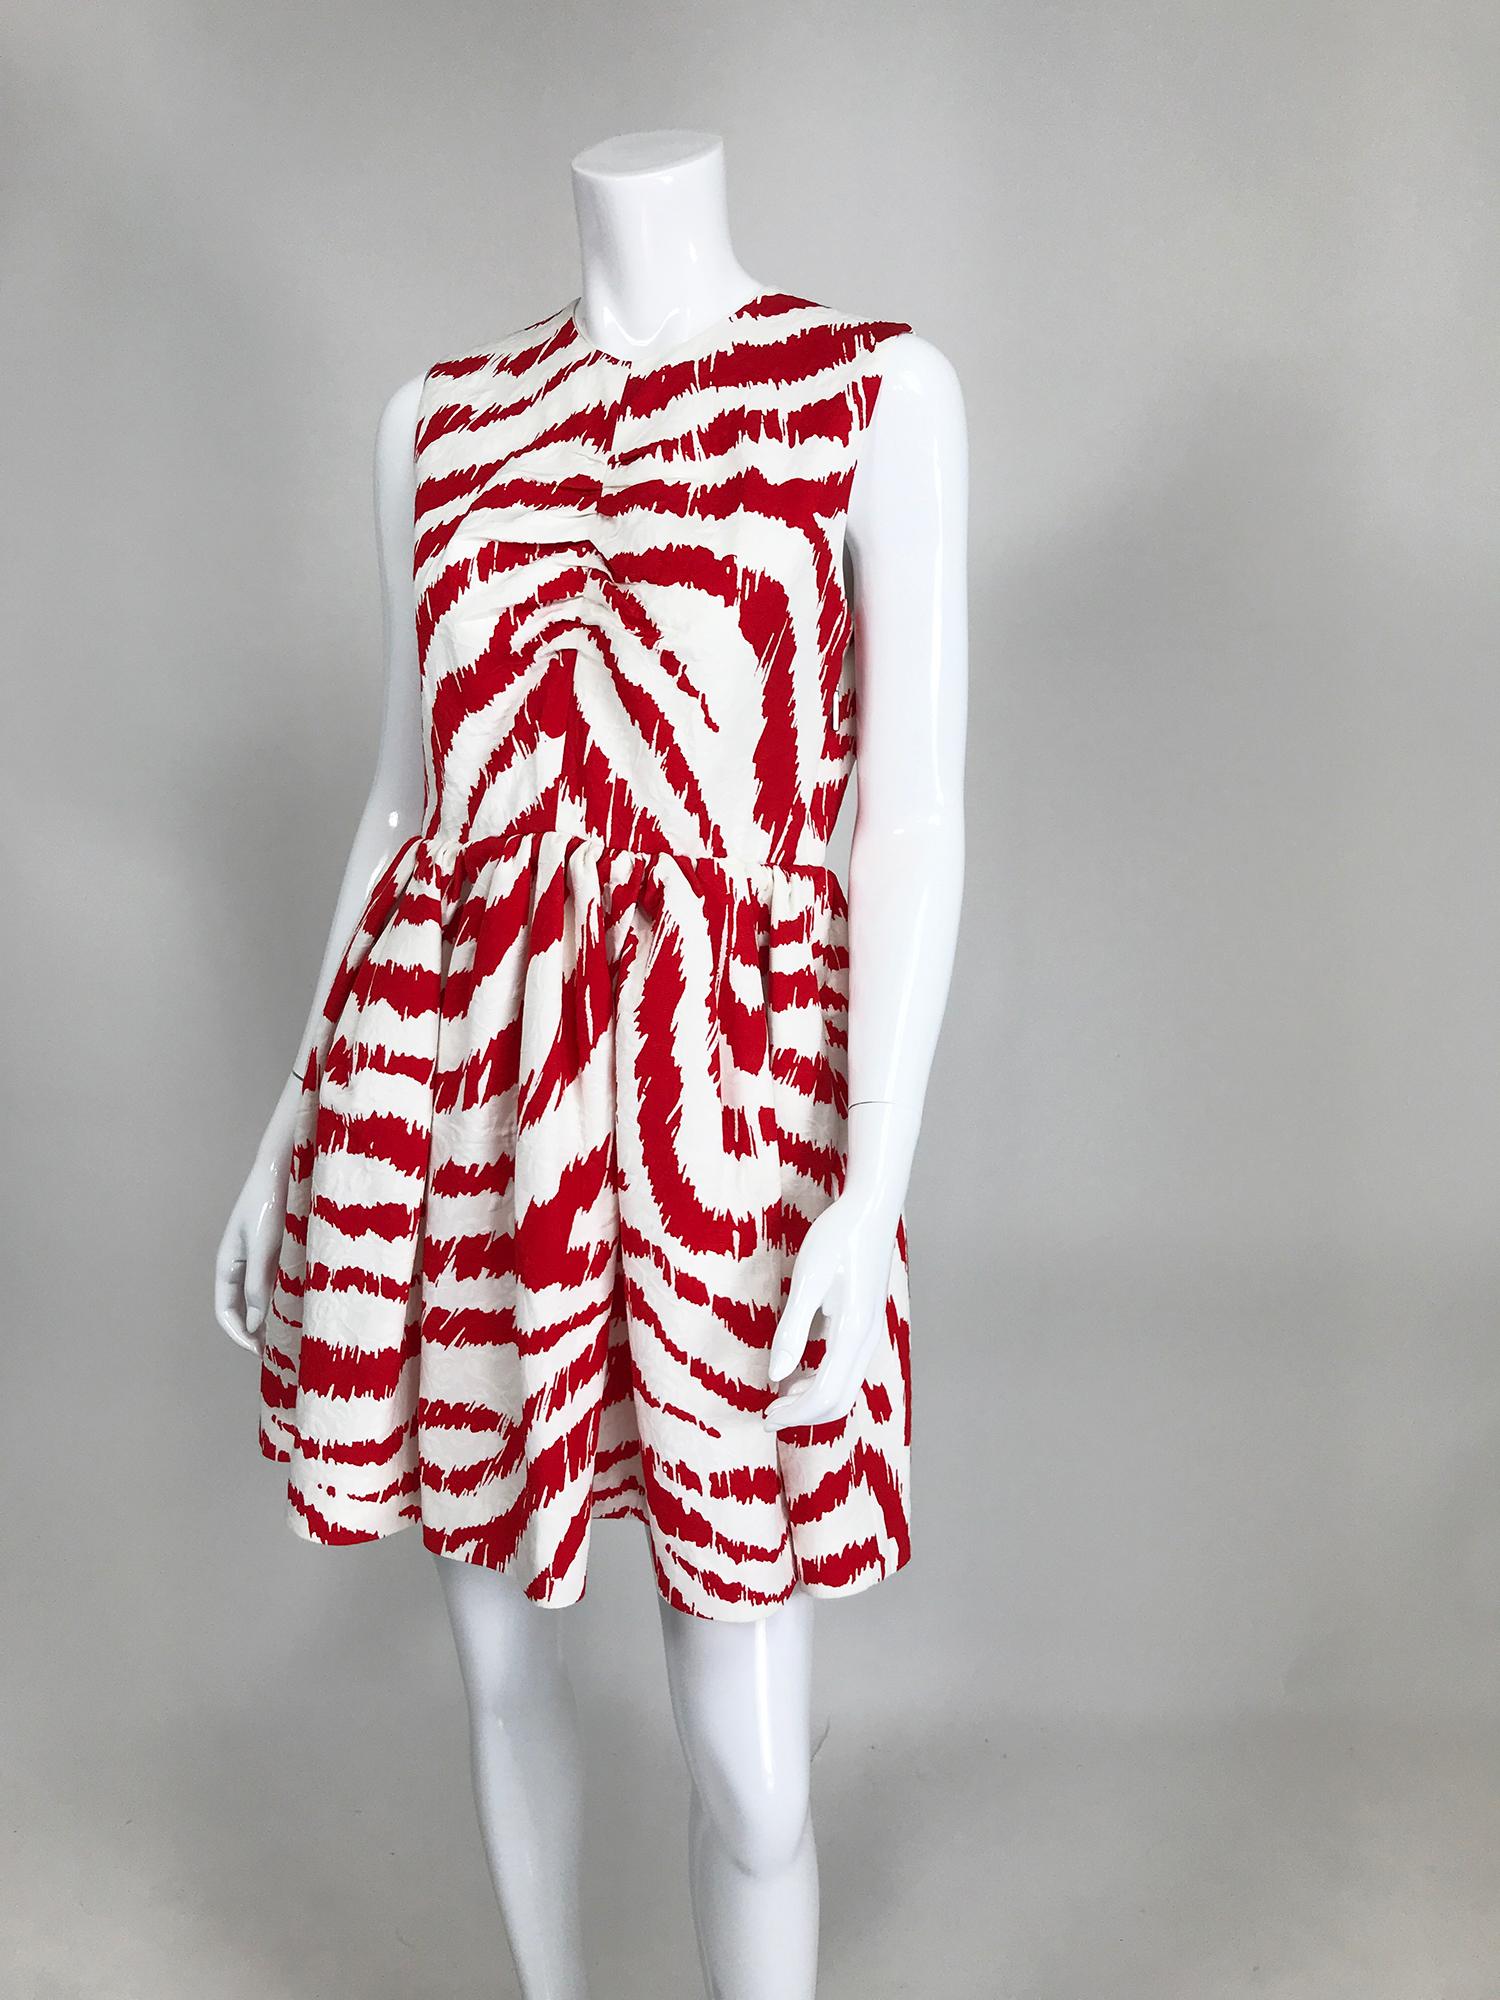 MSGN Milano red & white zebra print cotton blend dress unworn with tags. Jewel neckline, sleeveless dress with a center shirred seam front, the full skirt sits just below the natural waist and has on seam side pockets. The dress closes at the back